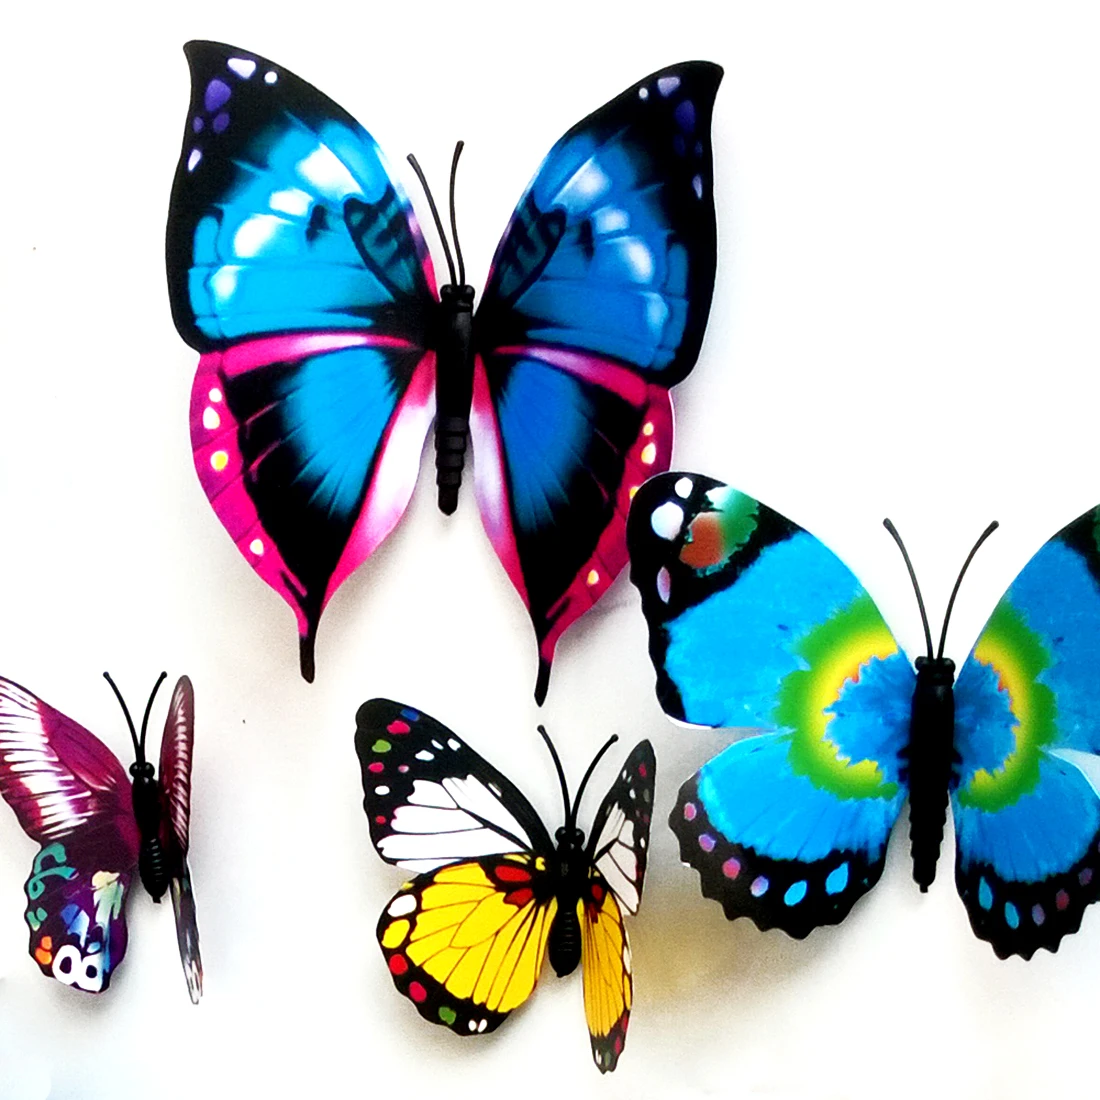 Image 2015 Hot New 6 Small   6 Big For Home Fridge Decoration 3D Butterflies Decals Butterfly Wall Stickers Gossip Girl Same Style